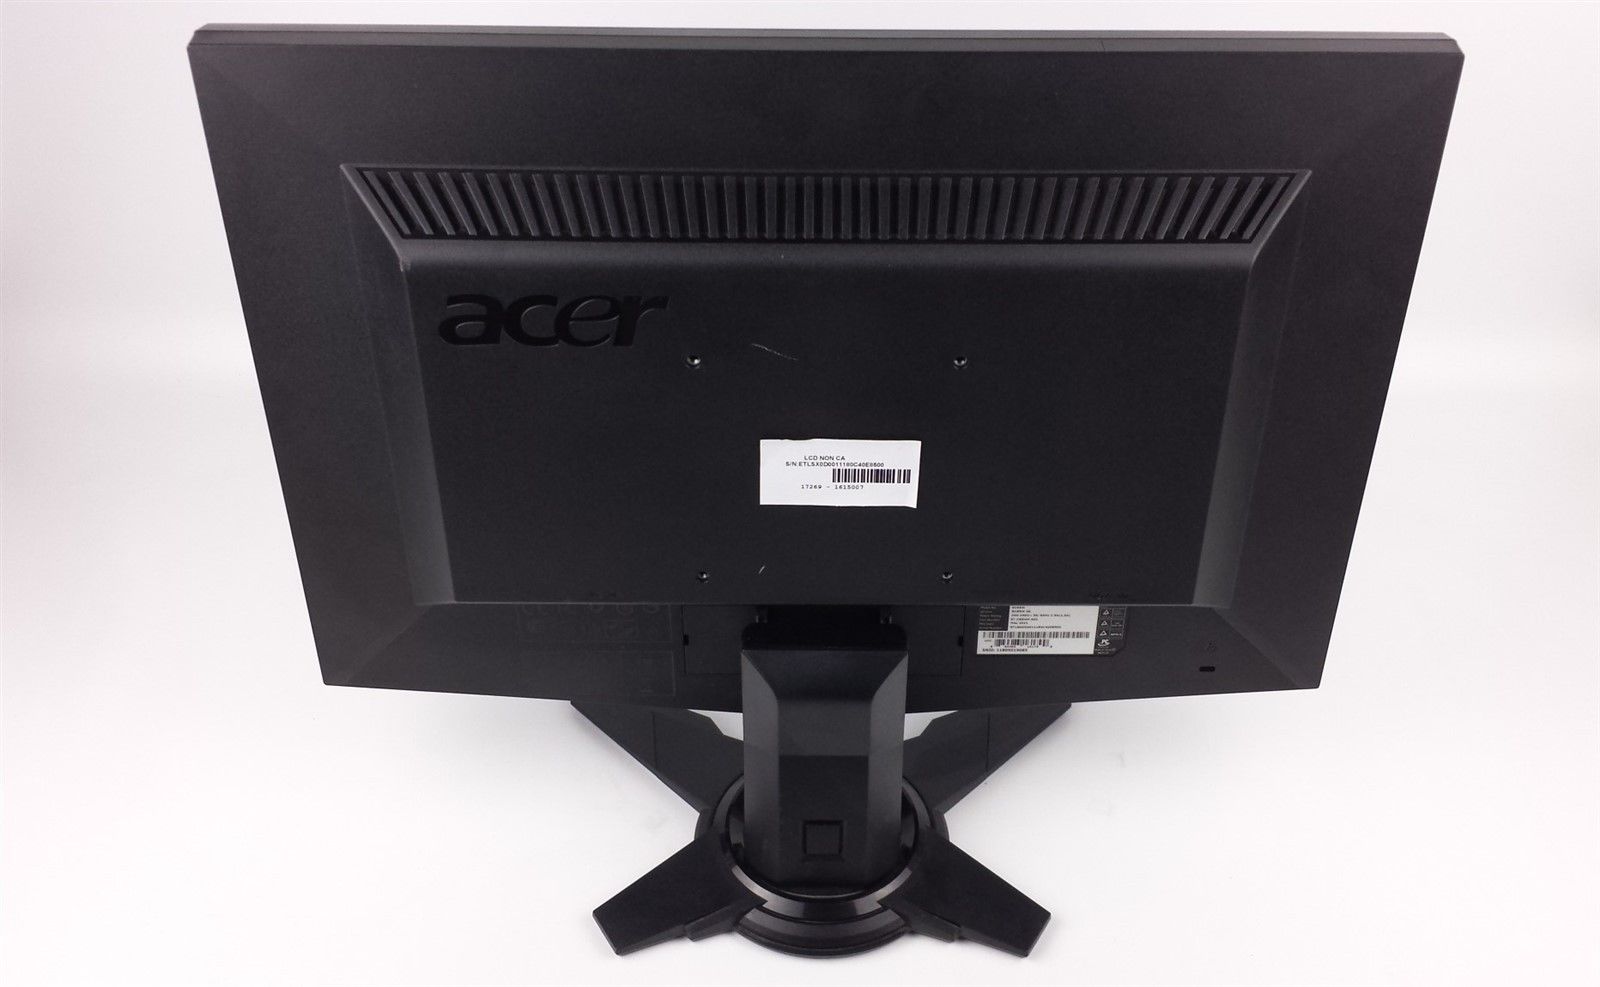 Acer Display G195W LCD Computer Monitor 19" with Power and VGA Cord